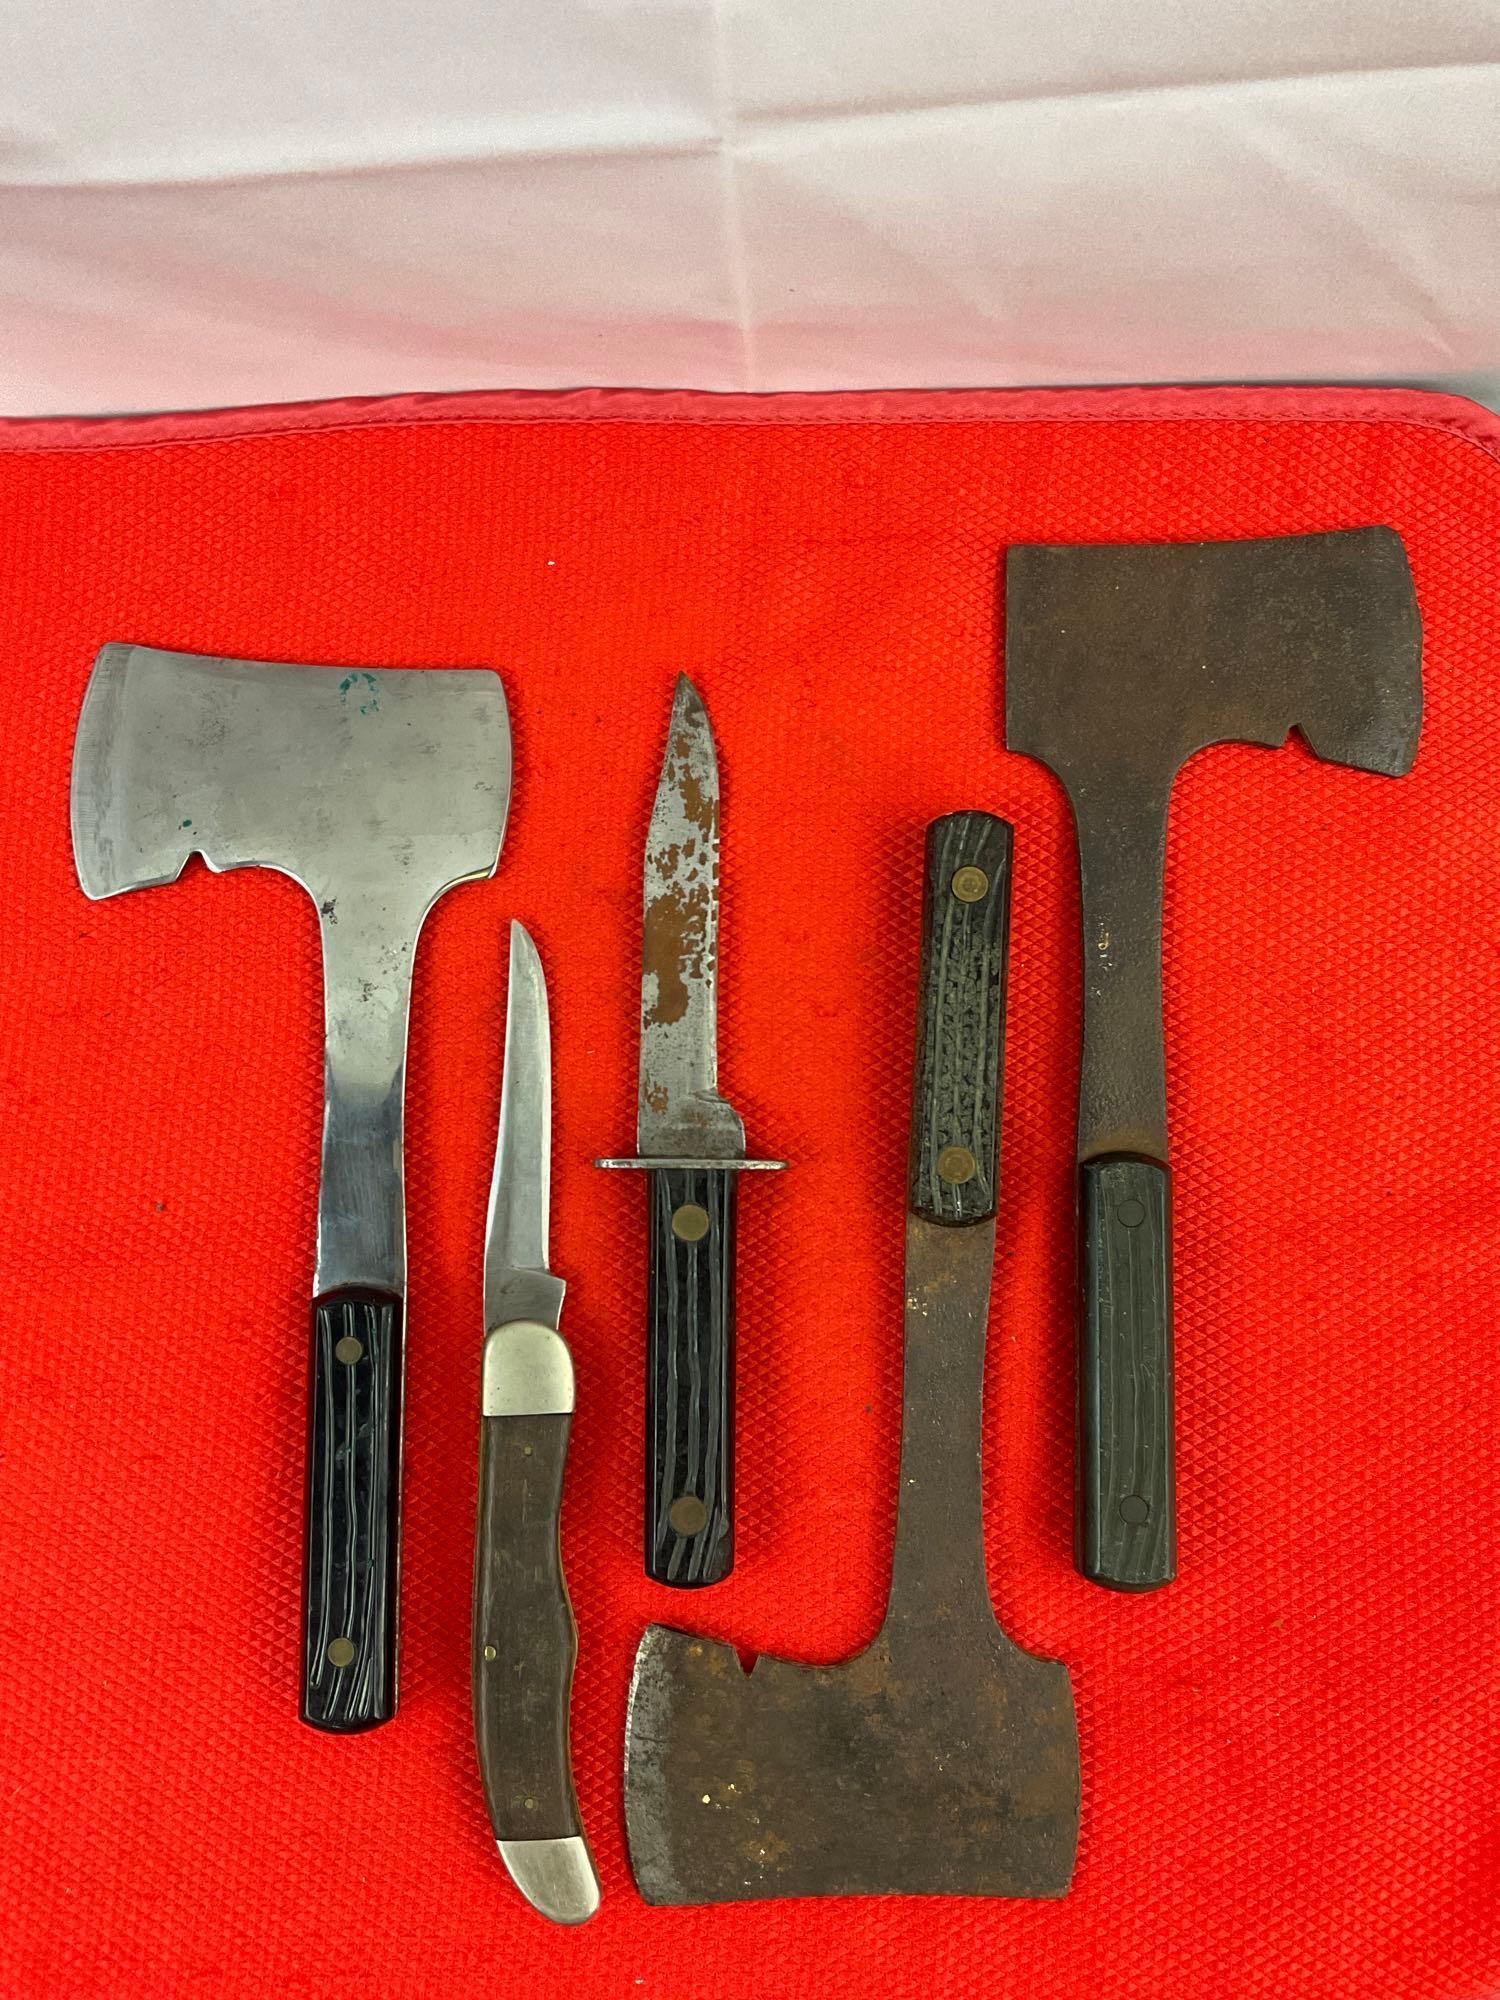 5 pcs Vintage Camping Hand Tool Assortment. 3x Camper's Hatchets, 2x Hunting Knives. As Is. See